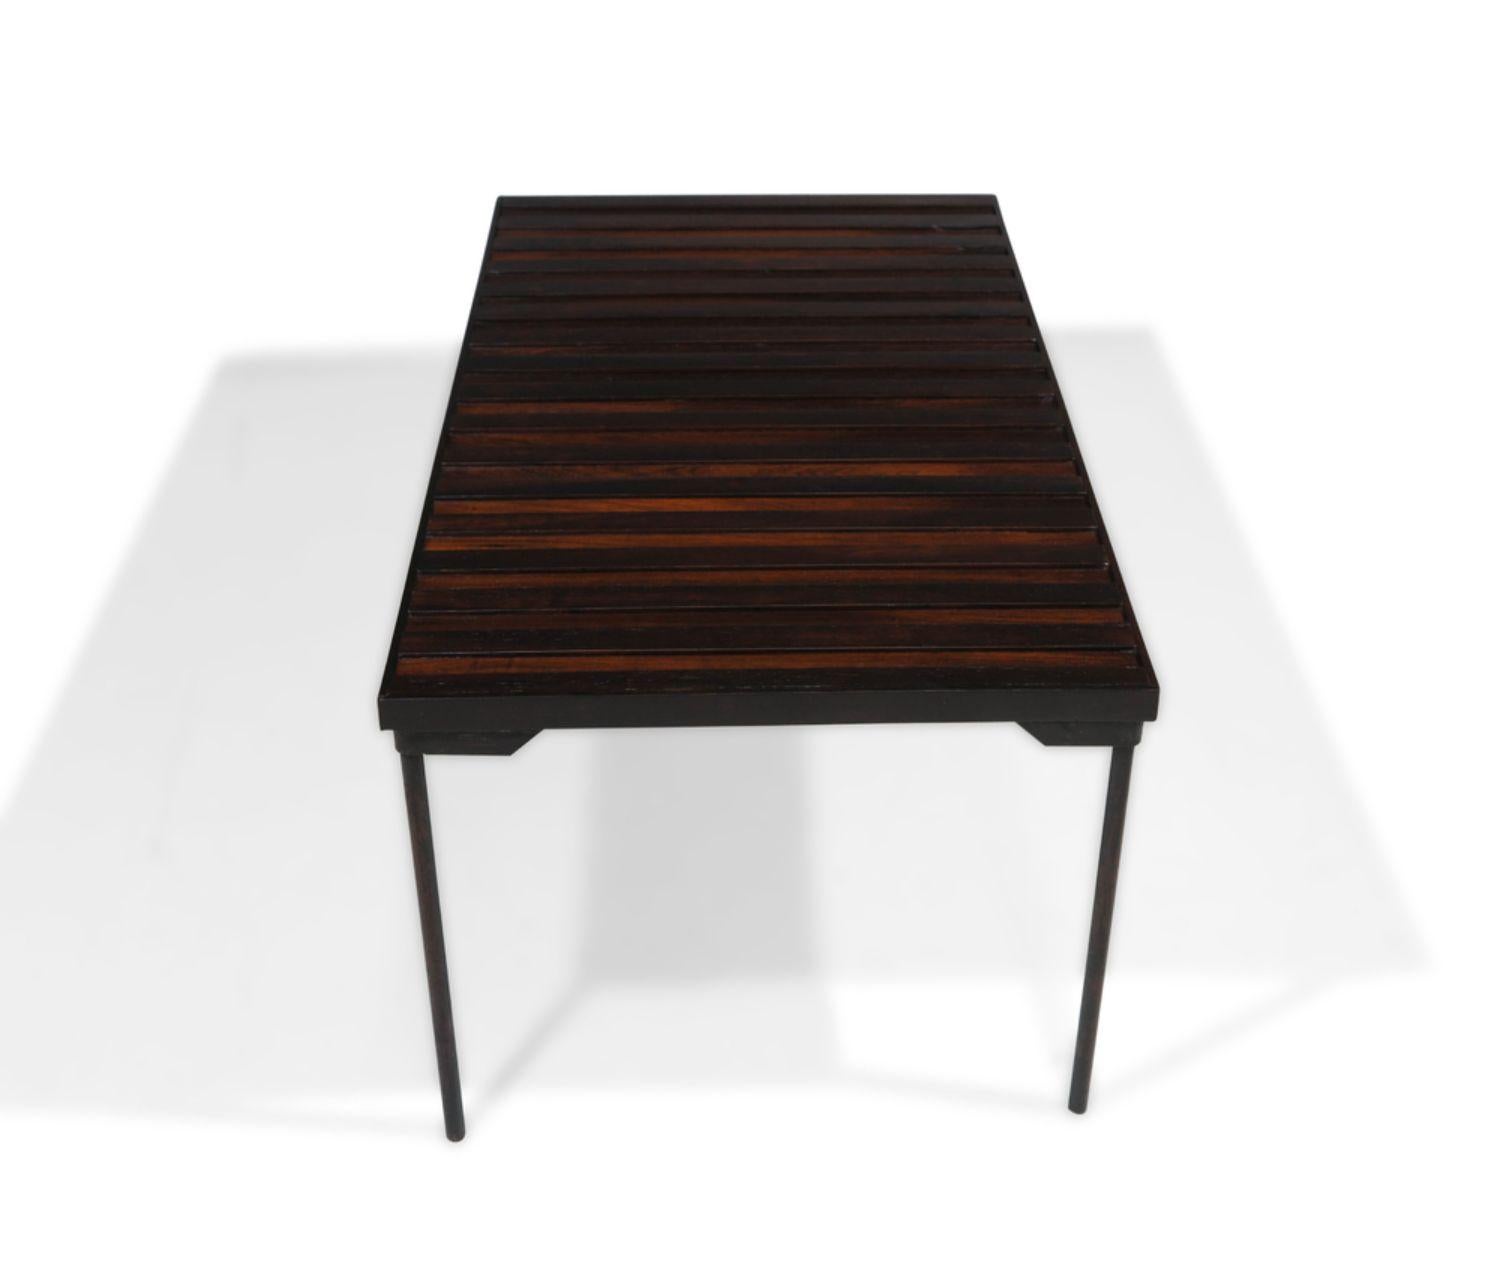 20th Century Mid-century Brazilian Modern Rosewood Coffee Table With Iron Legs For Sale